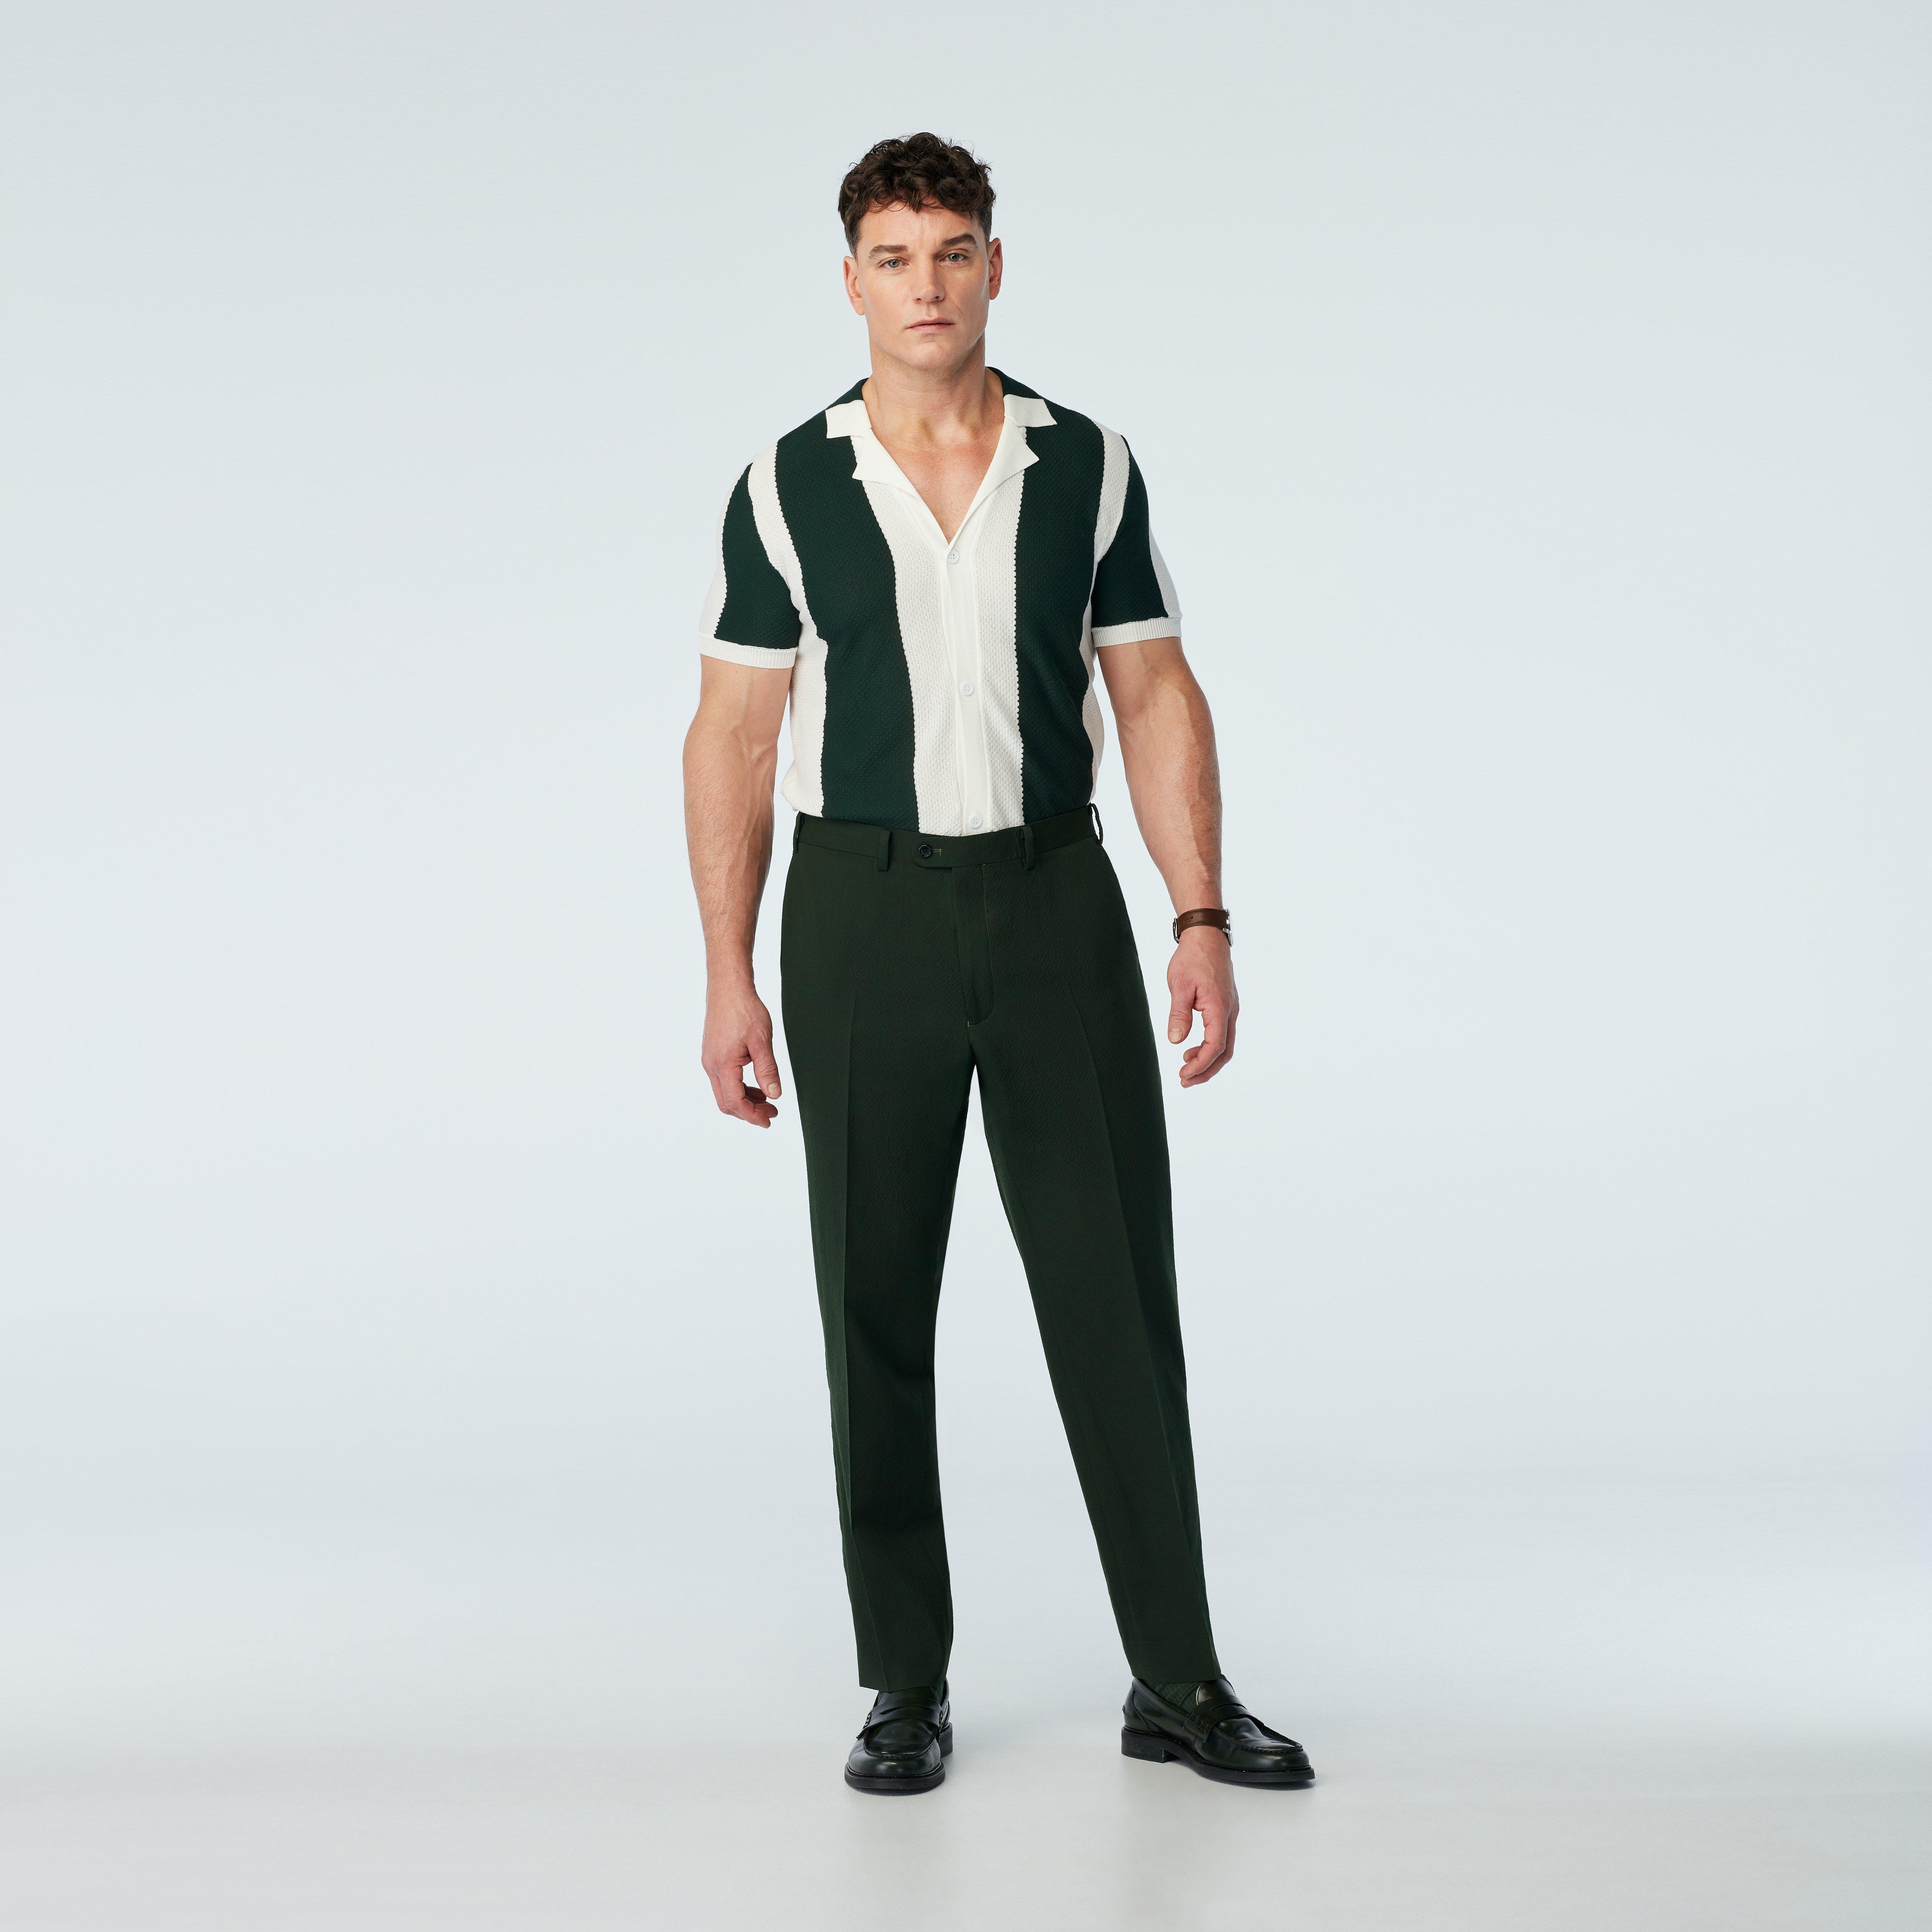 Custom Pants Made For You - Stapleford Seersucker Olive pants | INDOCHINO